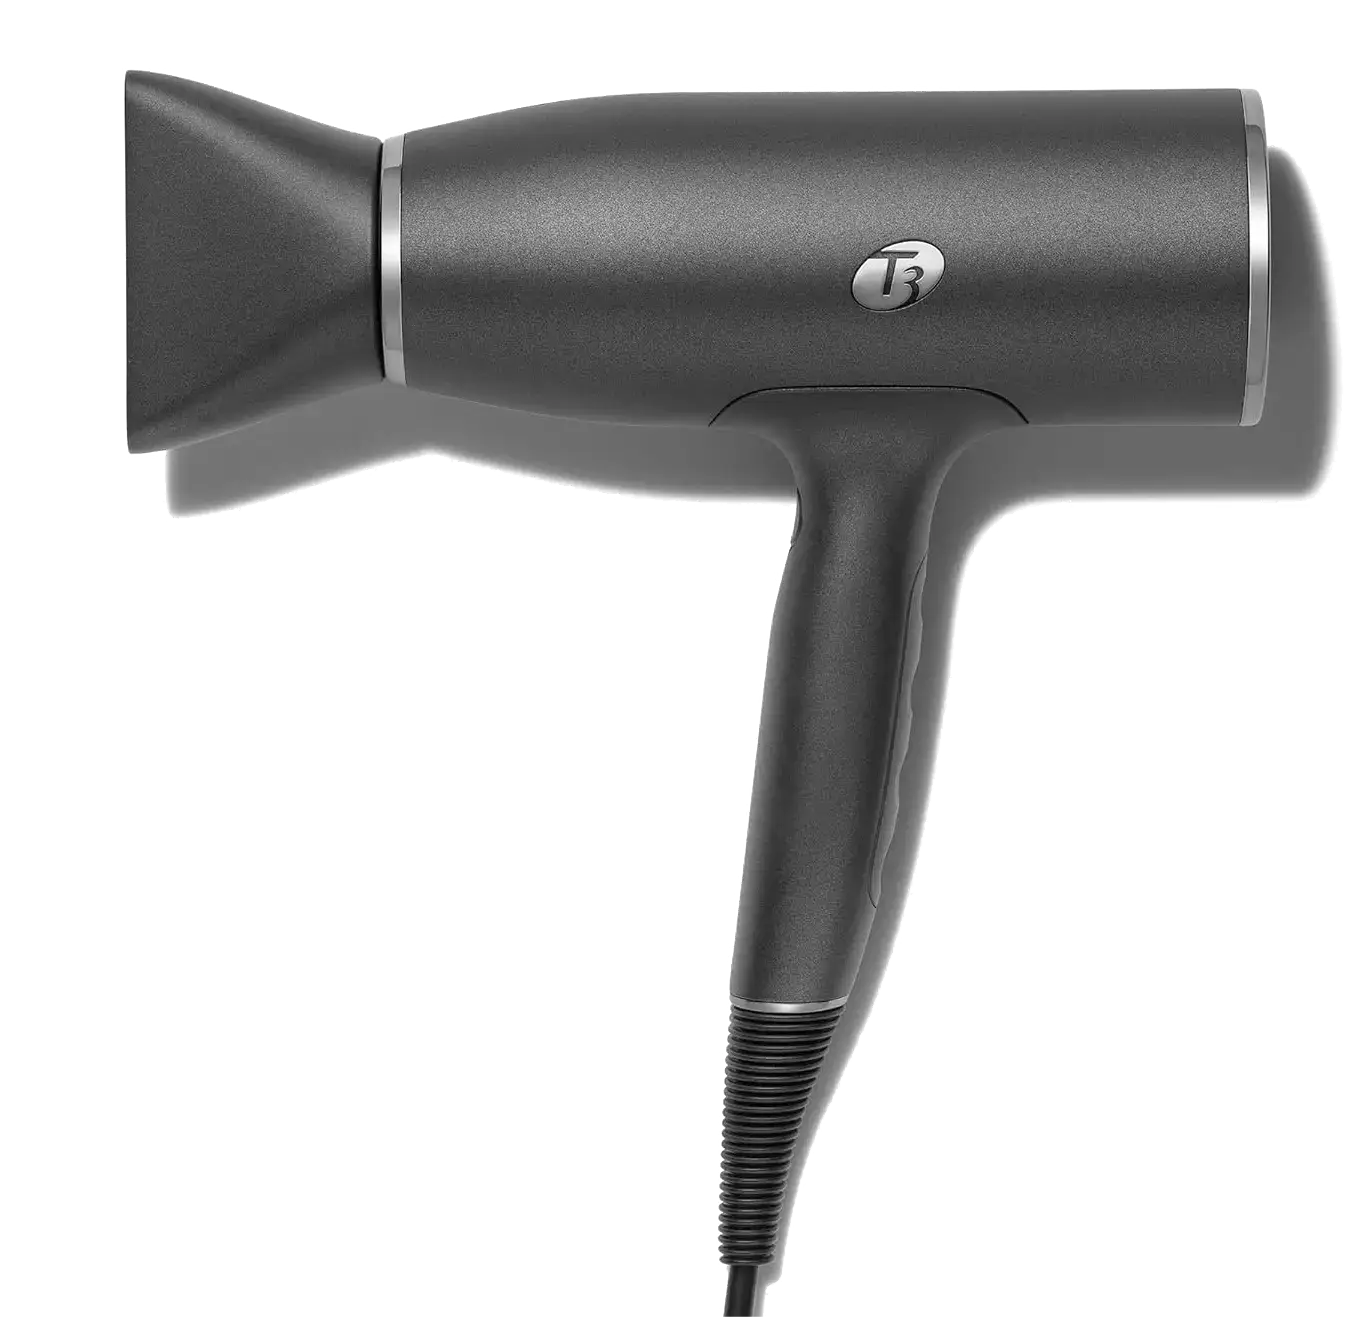 T3 Cura Luxe Hair Dryer